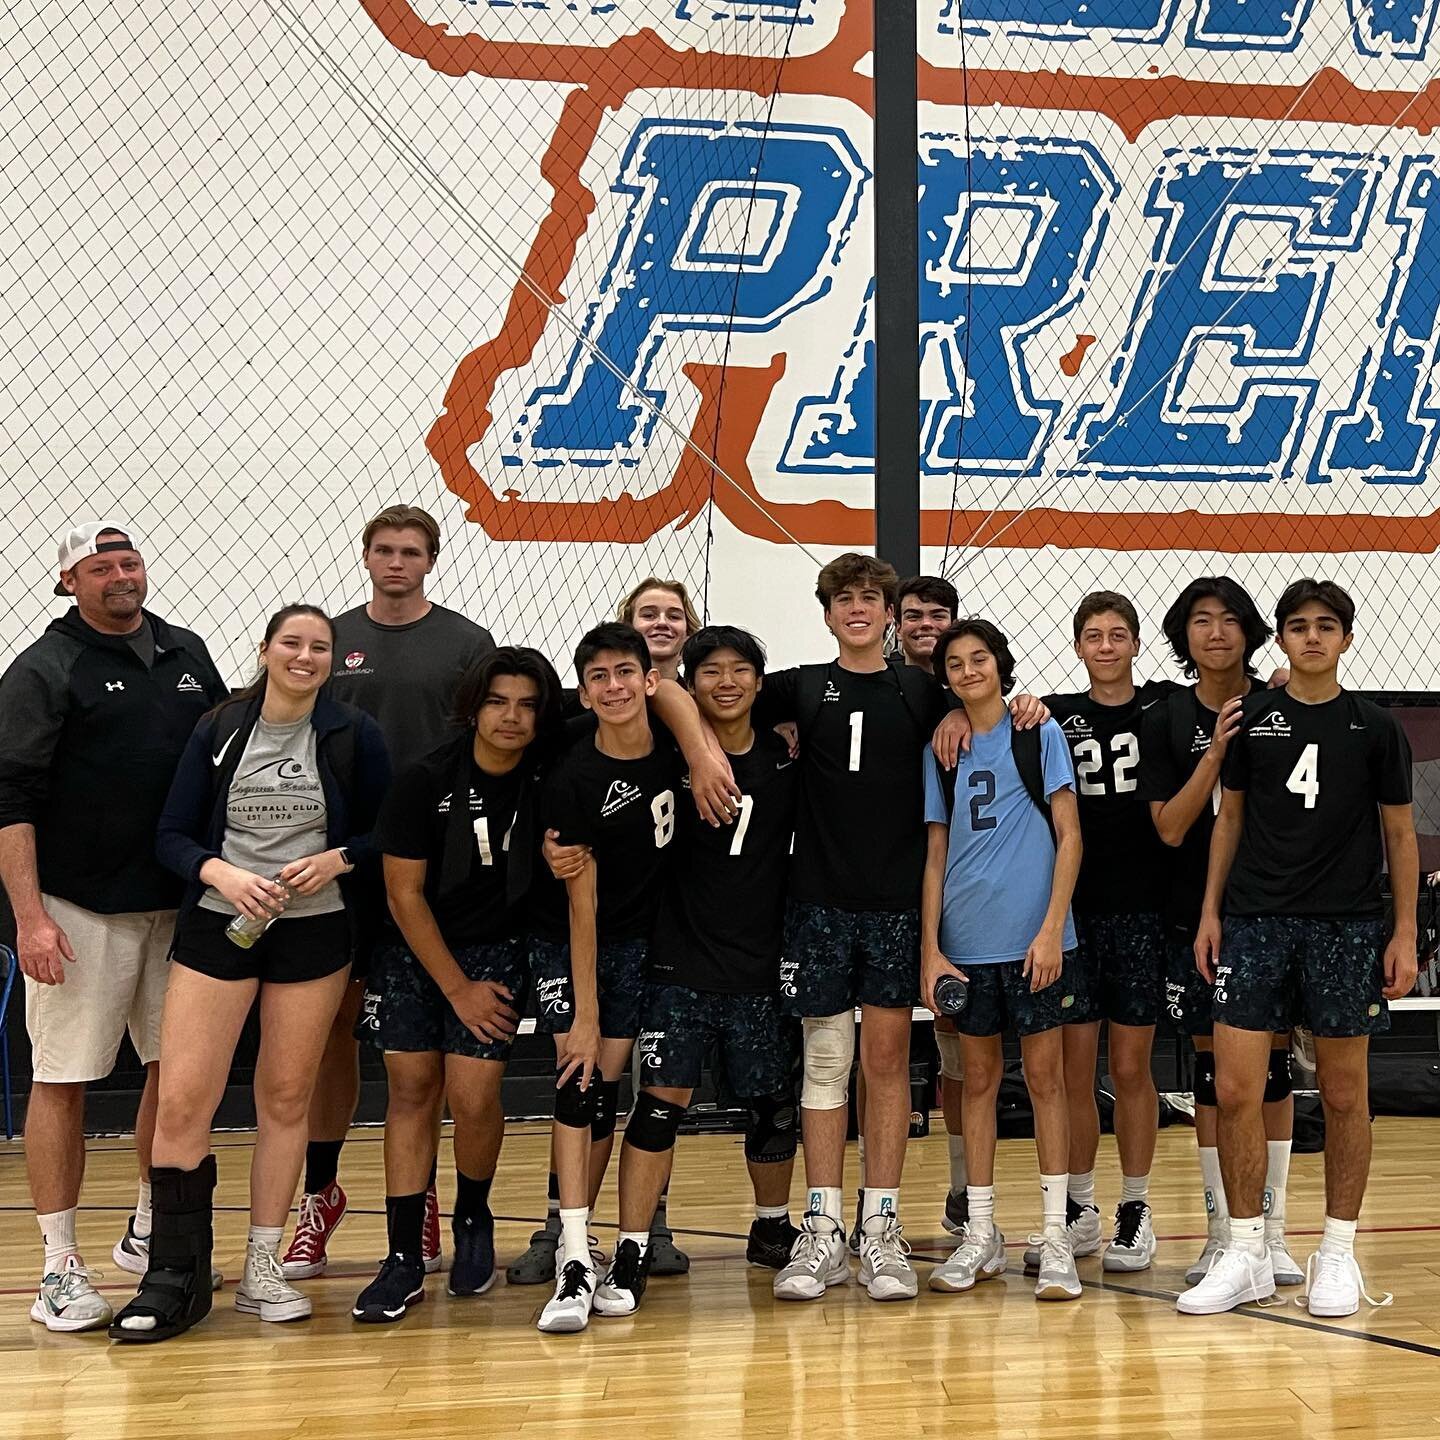 Great job 16Brian! You did awesome today! 🏐 Go Laguna!!